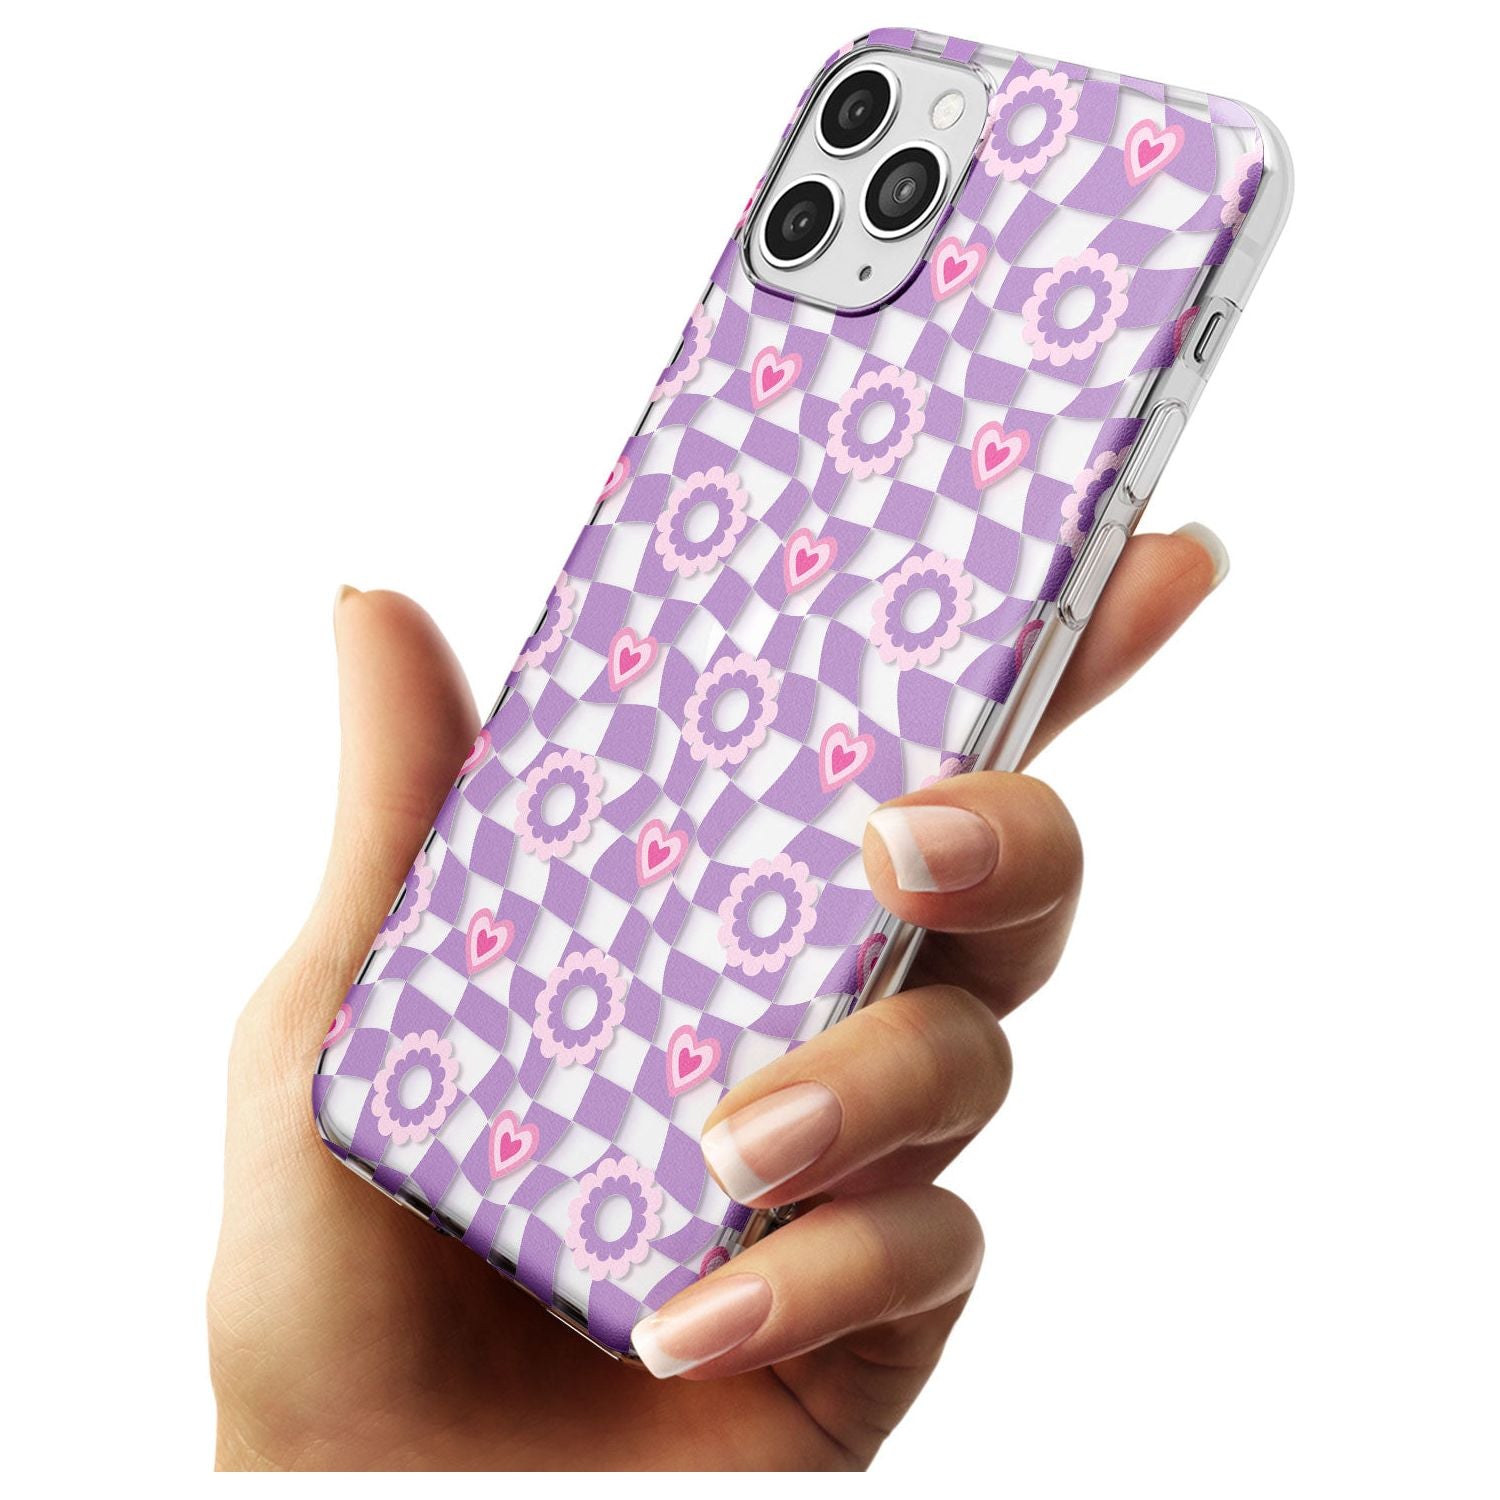 Checkered Love Pattern Slim TPU Phone Case for iPhone 11 Pro Max